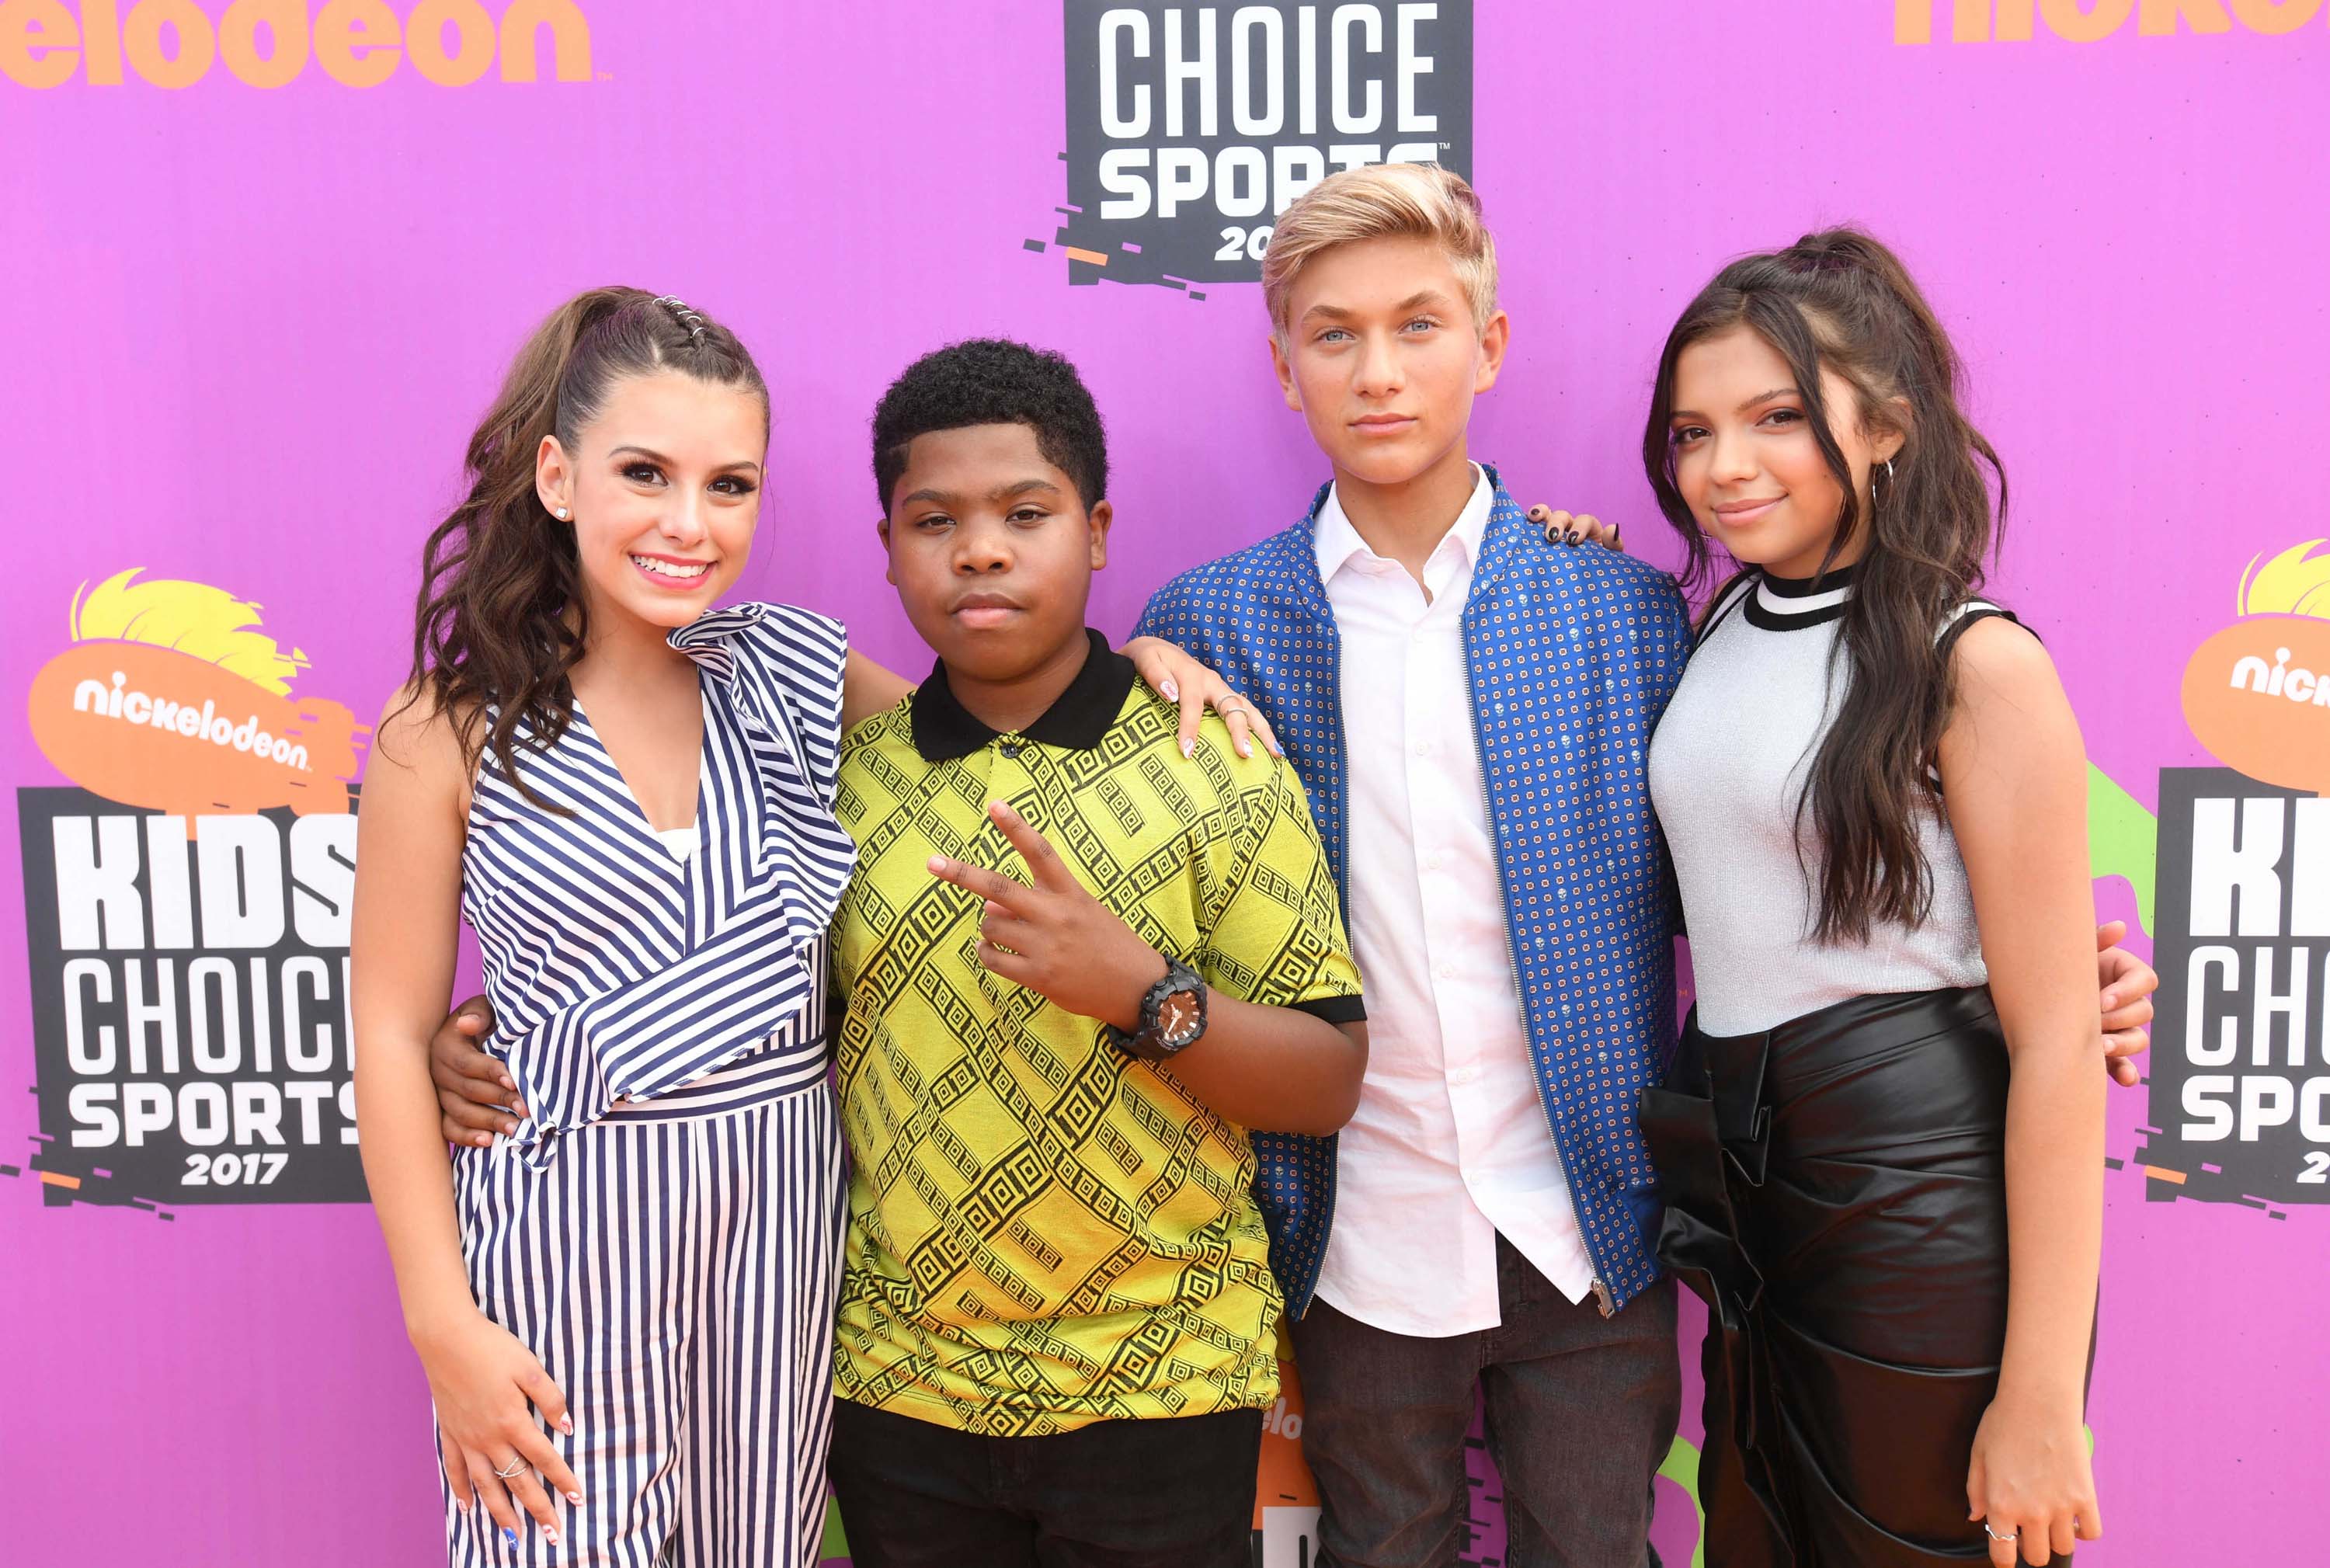 Cree Cicchino attends the Nickelodeon Kids’ Choice Sports Awards